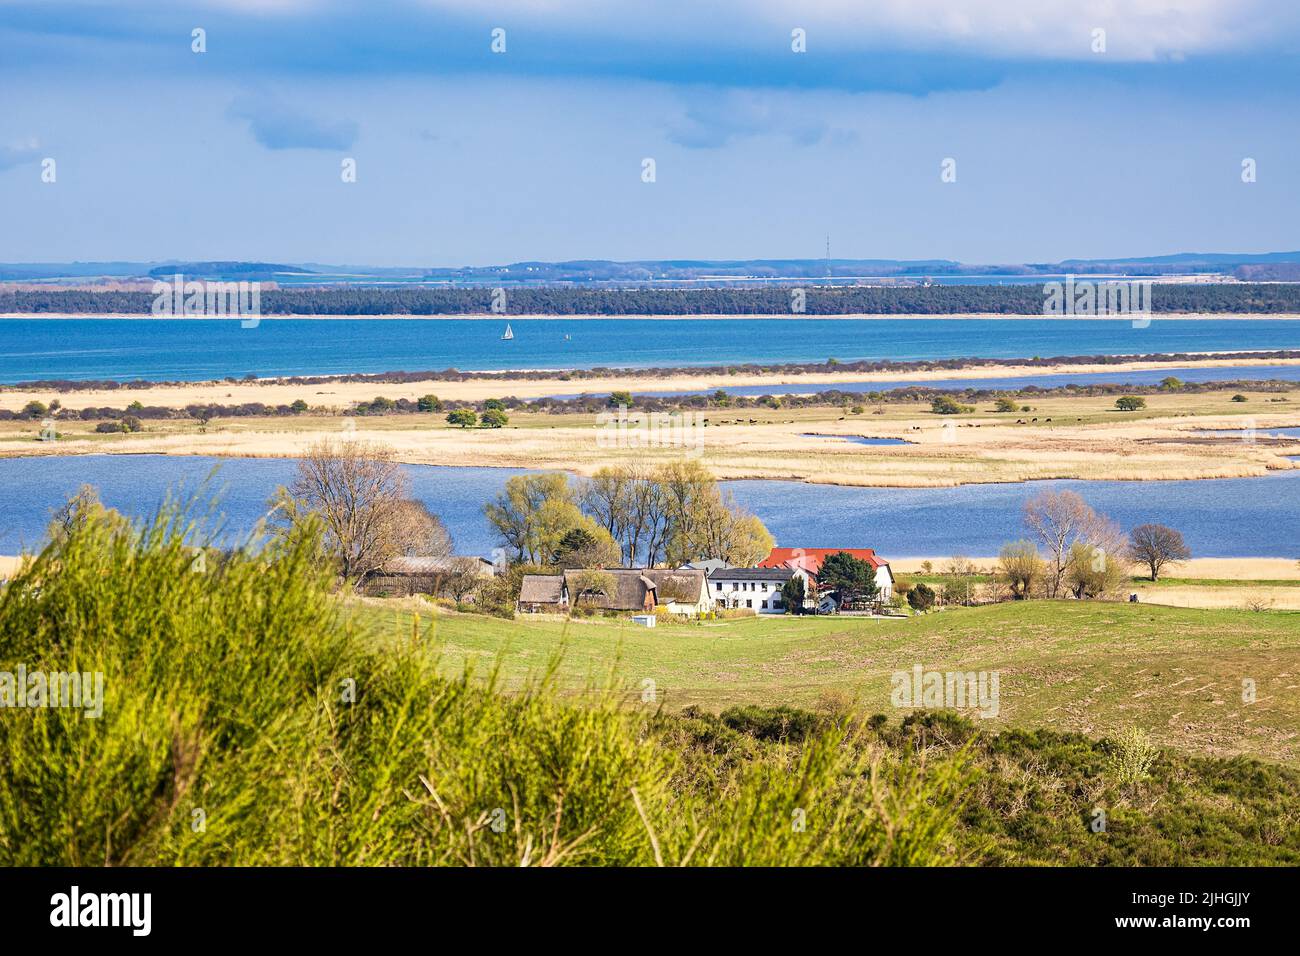 View to the village Grieben on the island Hiddensee, Germany. Stock Photo